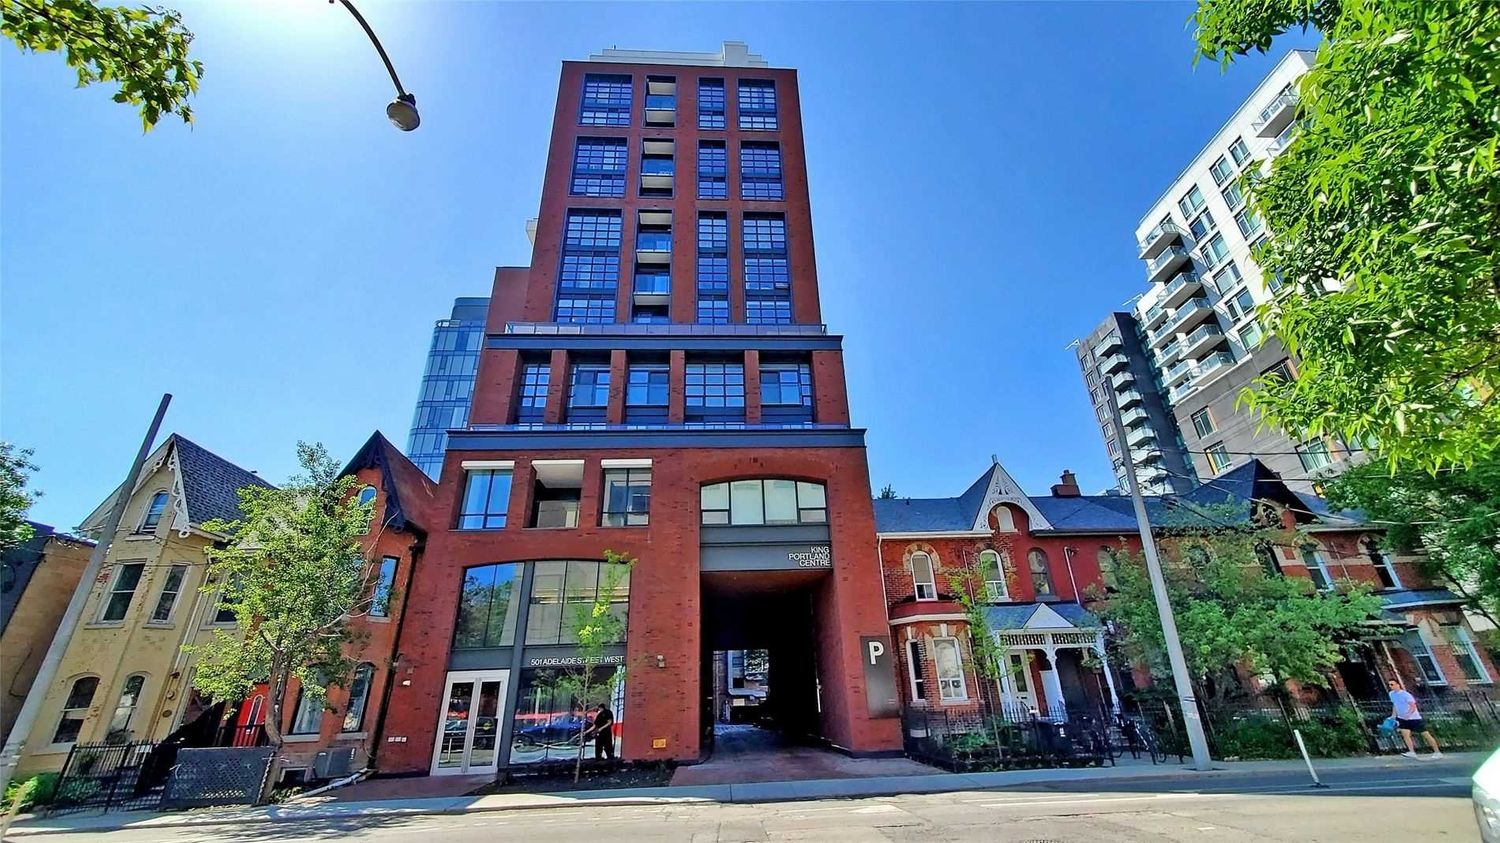 620 King Street W. Kingly Condos is located in  Downtown, Toronto - image #2 of 2